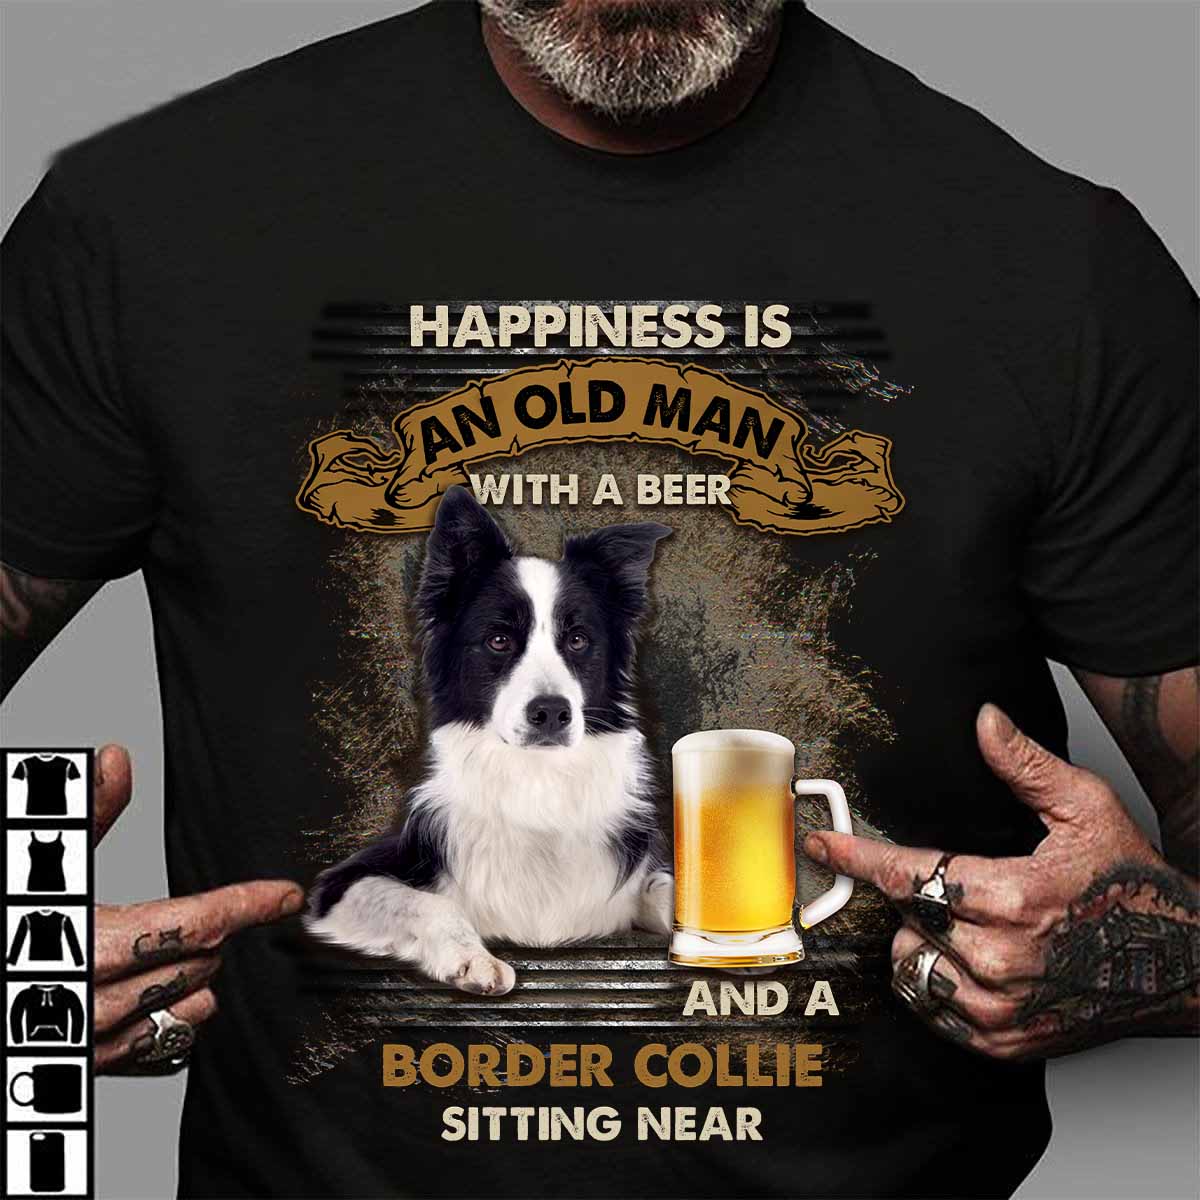 Border Collie Beer - Happiness is an old man with a beer and a border collie sitting near